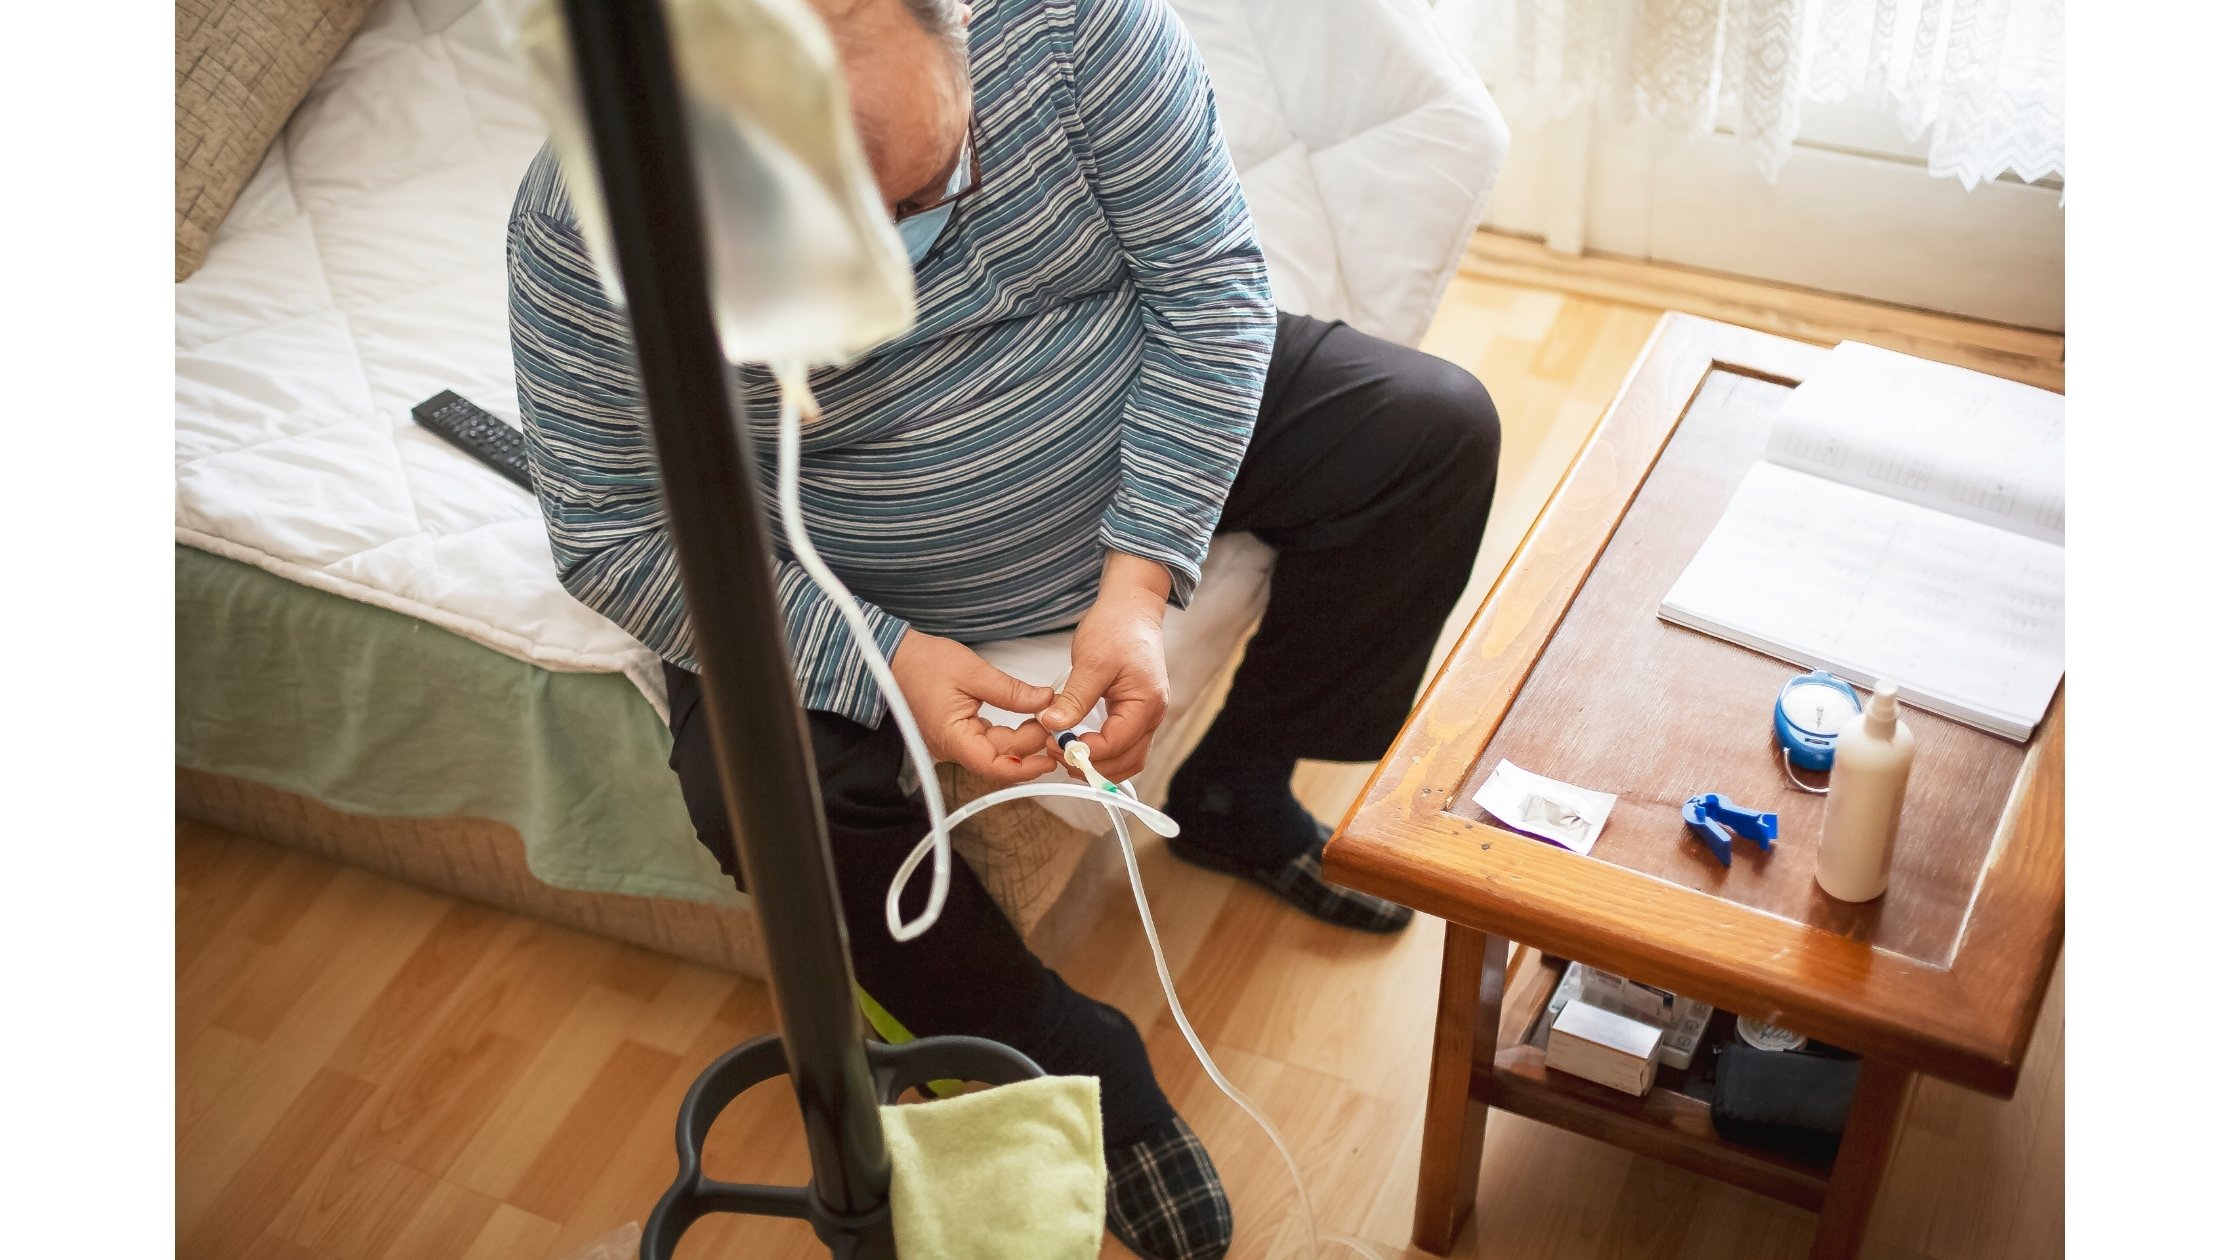 Kidney patient connecting peritoneal dialysis to an IV catheter